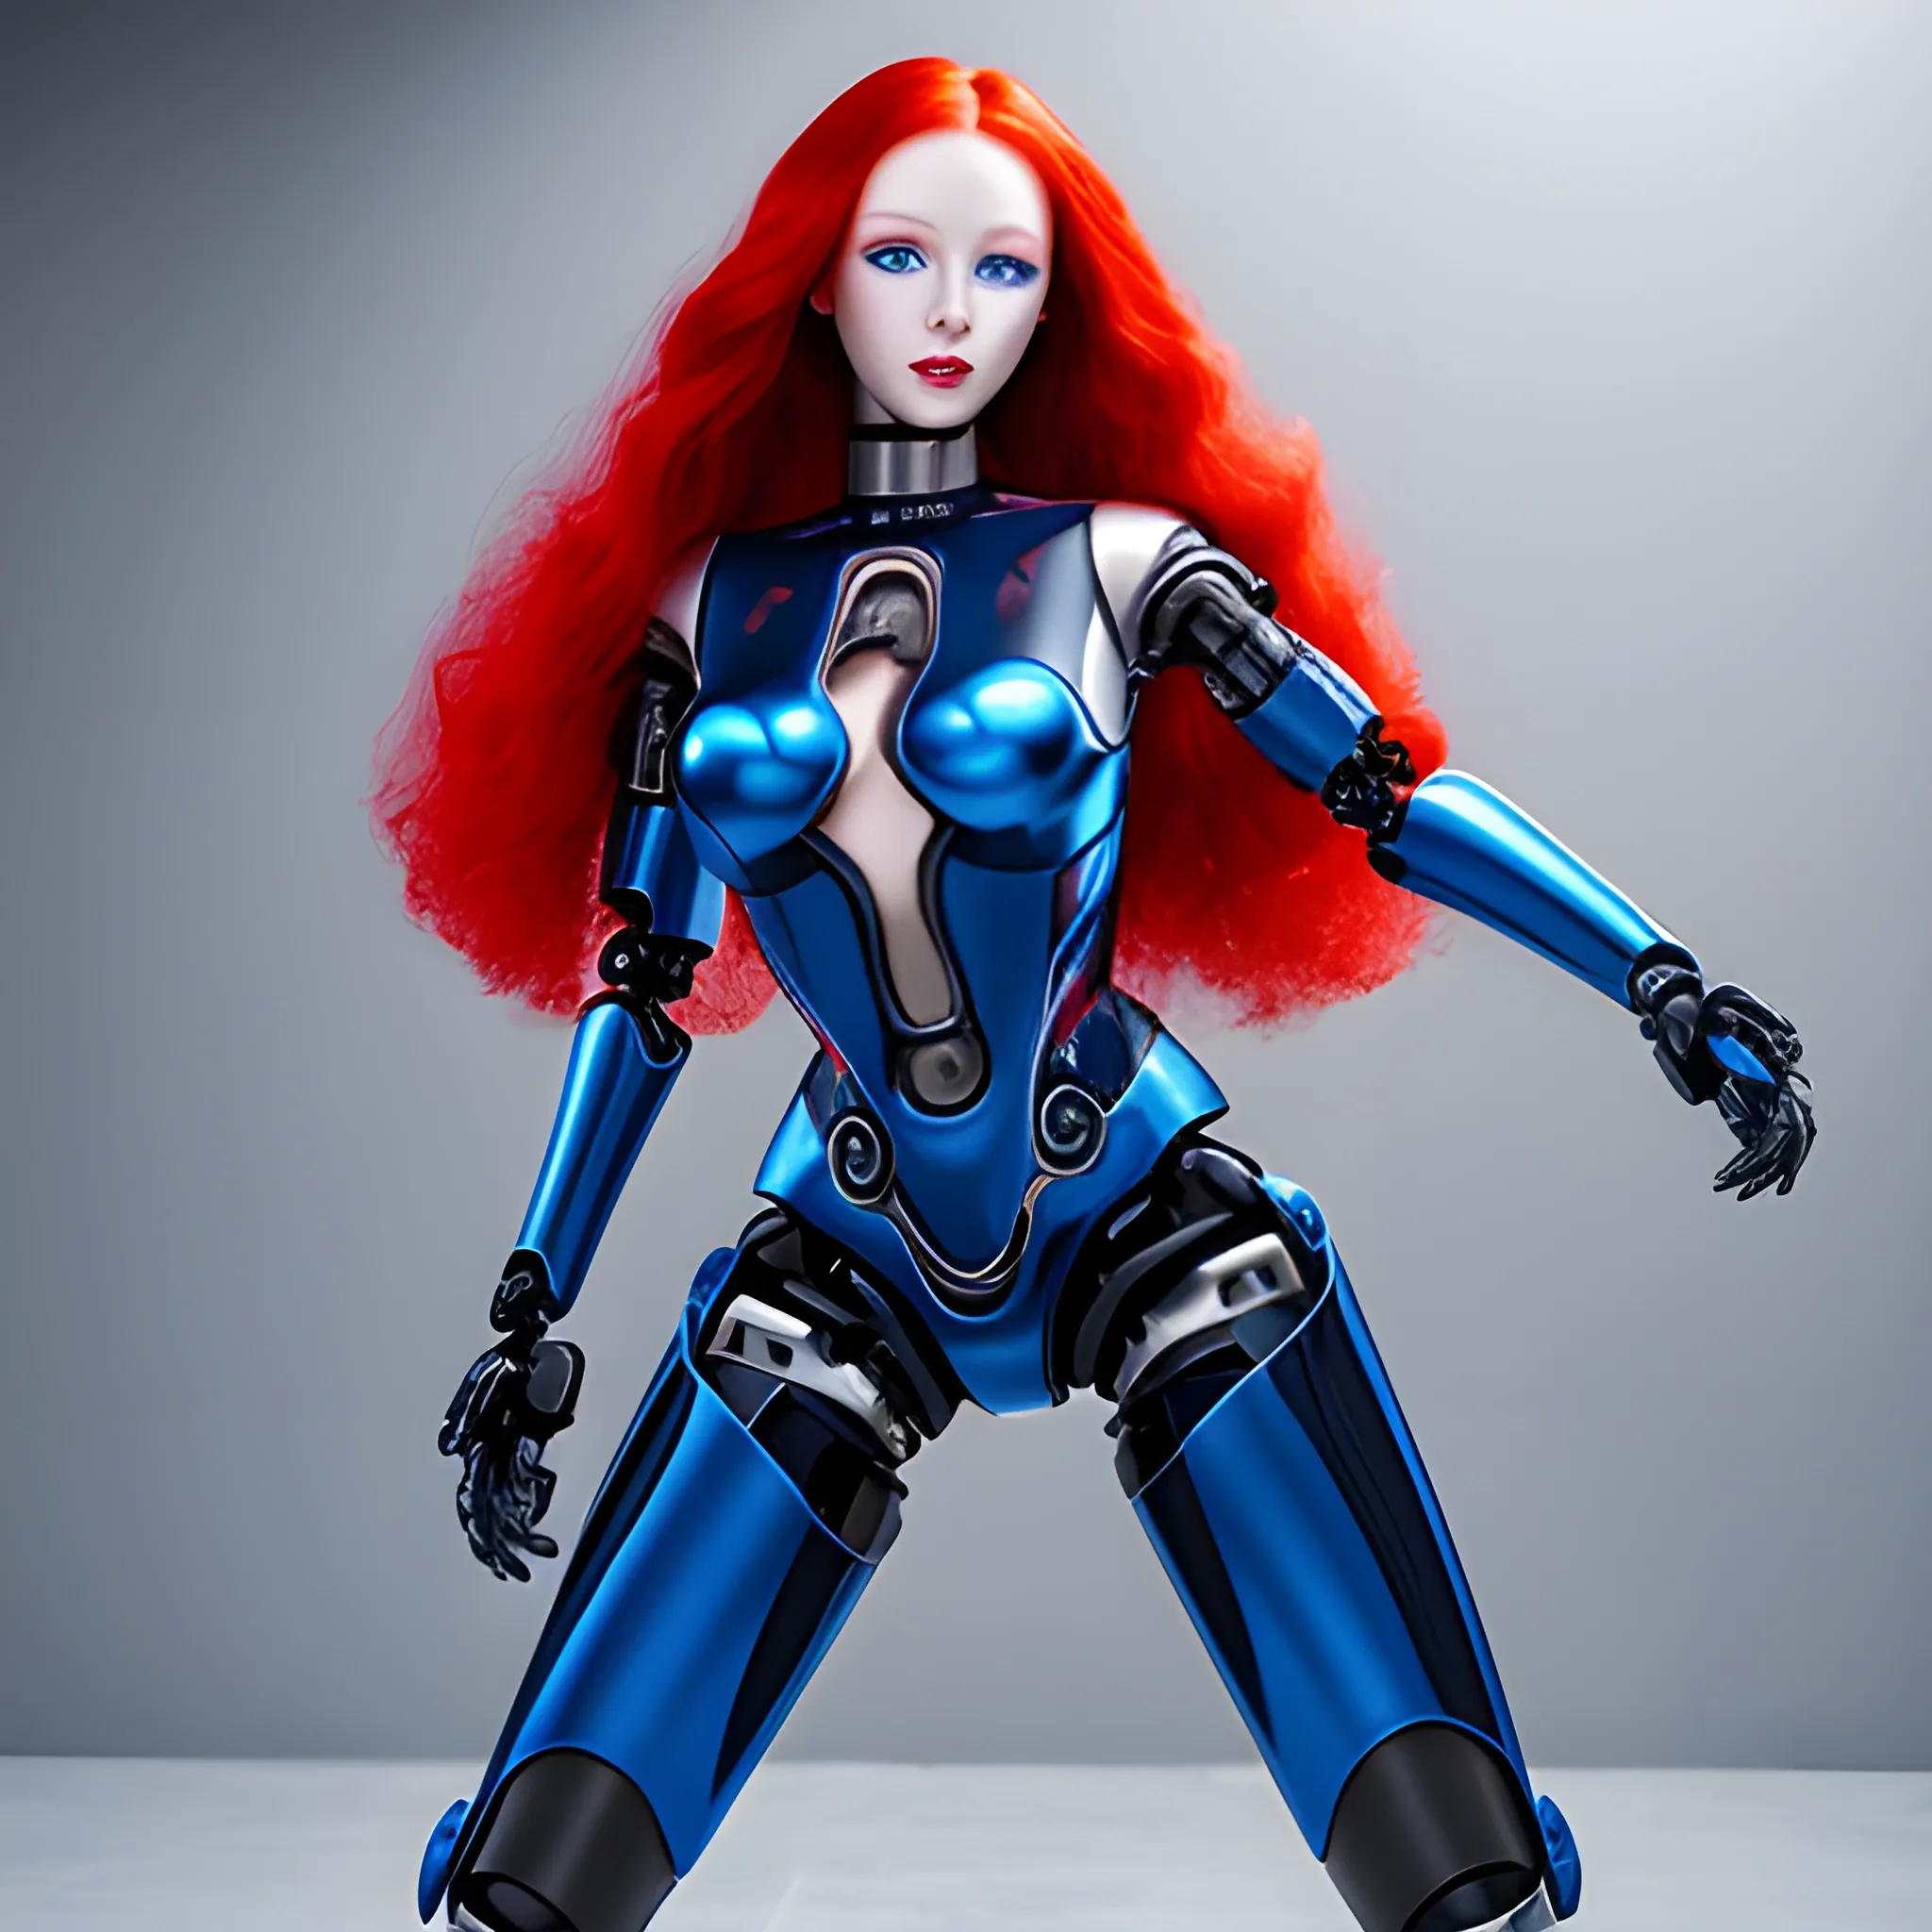 a human type female robot with sexy wardrobe, human face, long red hair, blue eyes, full body escene, battling pose
